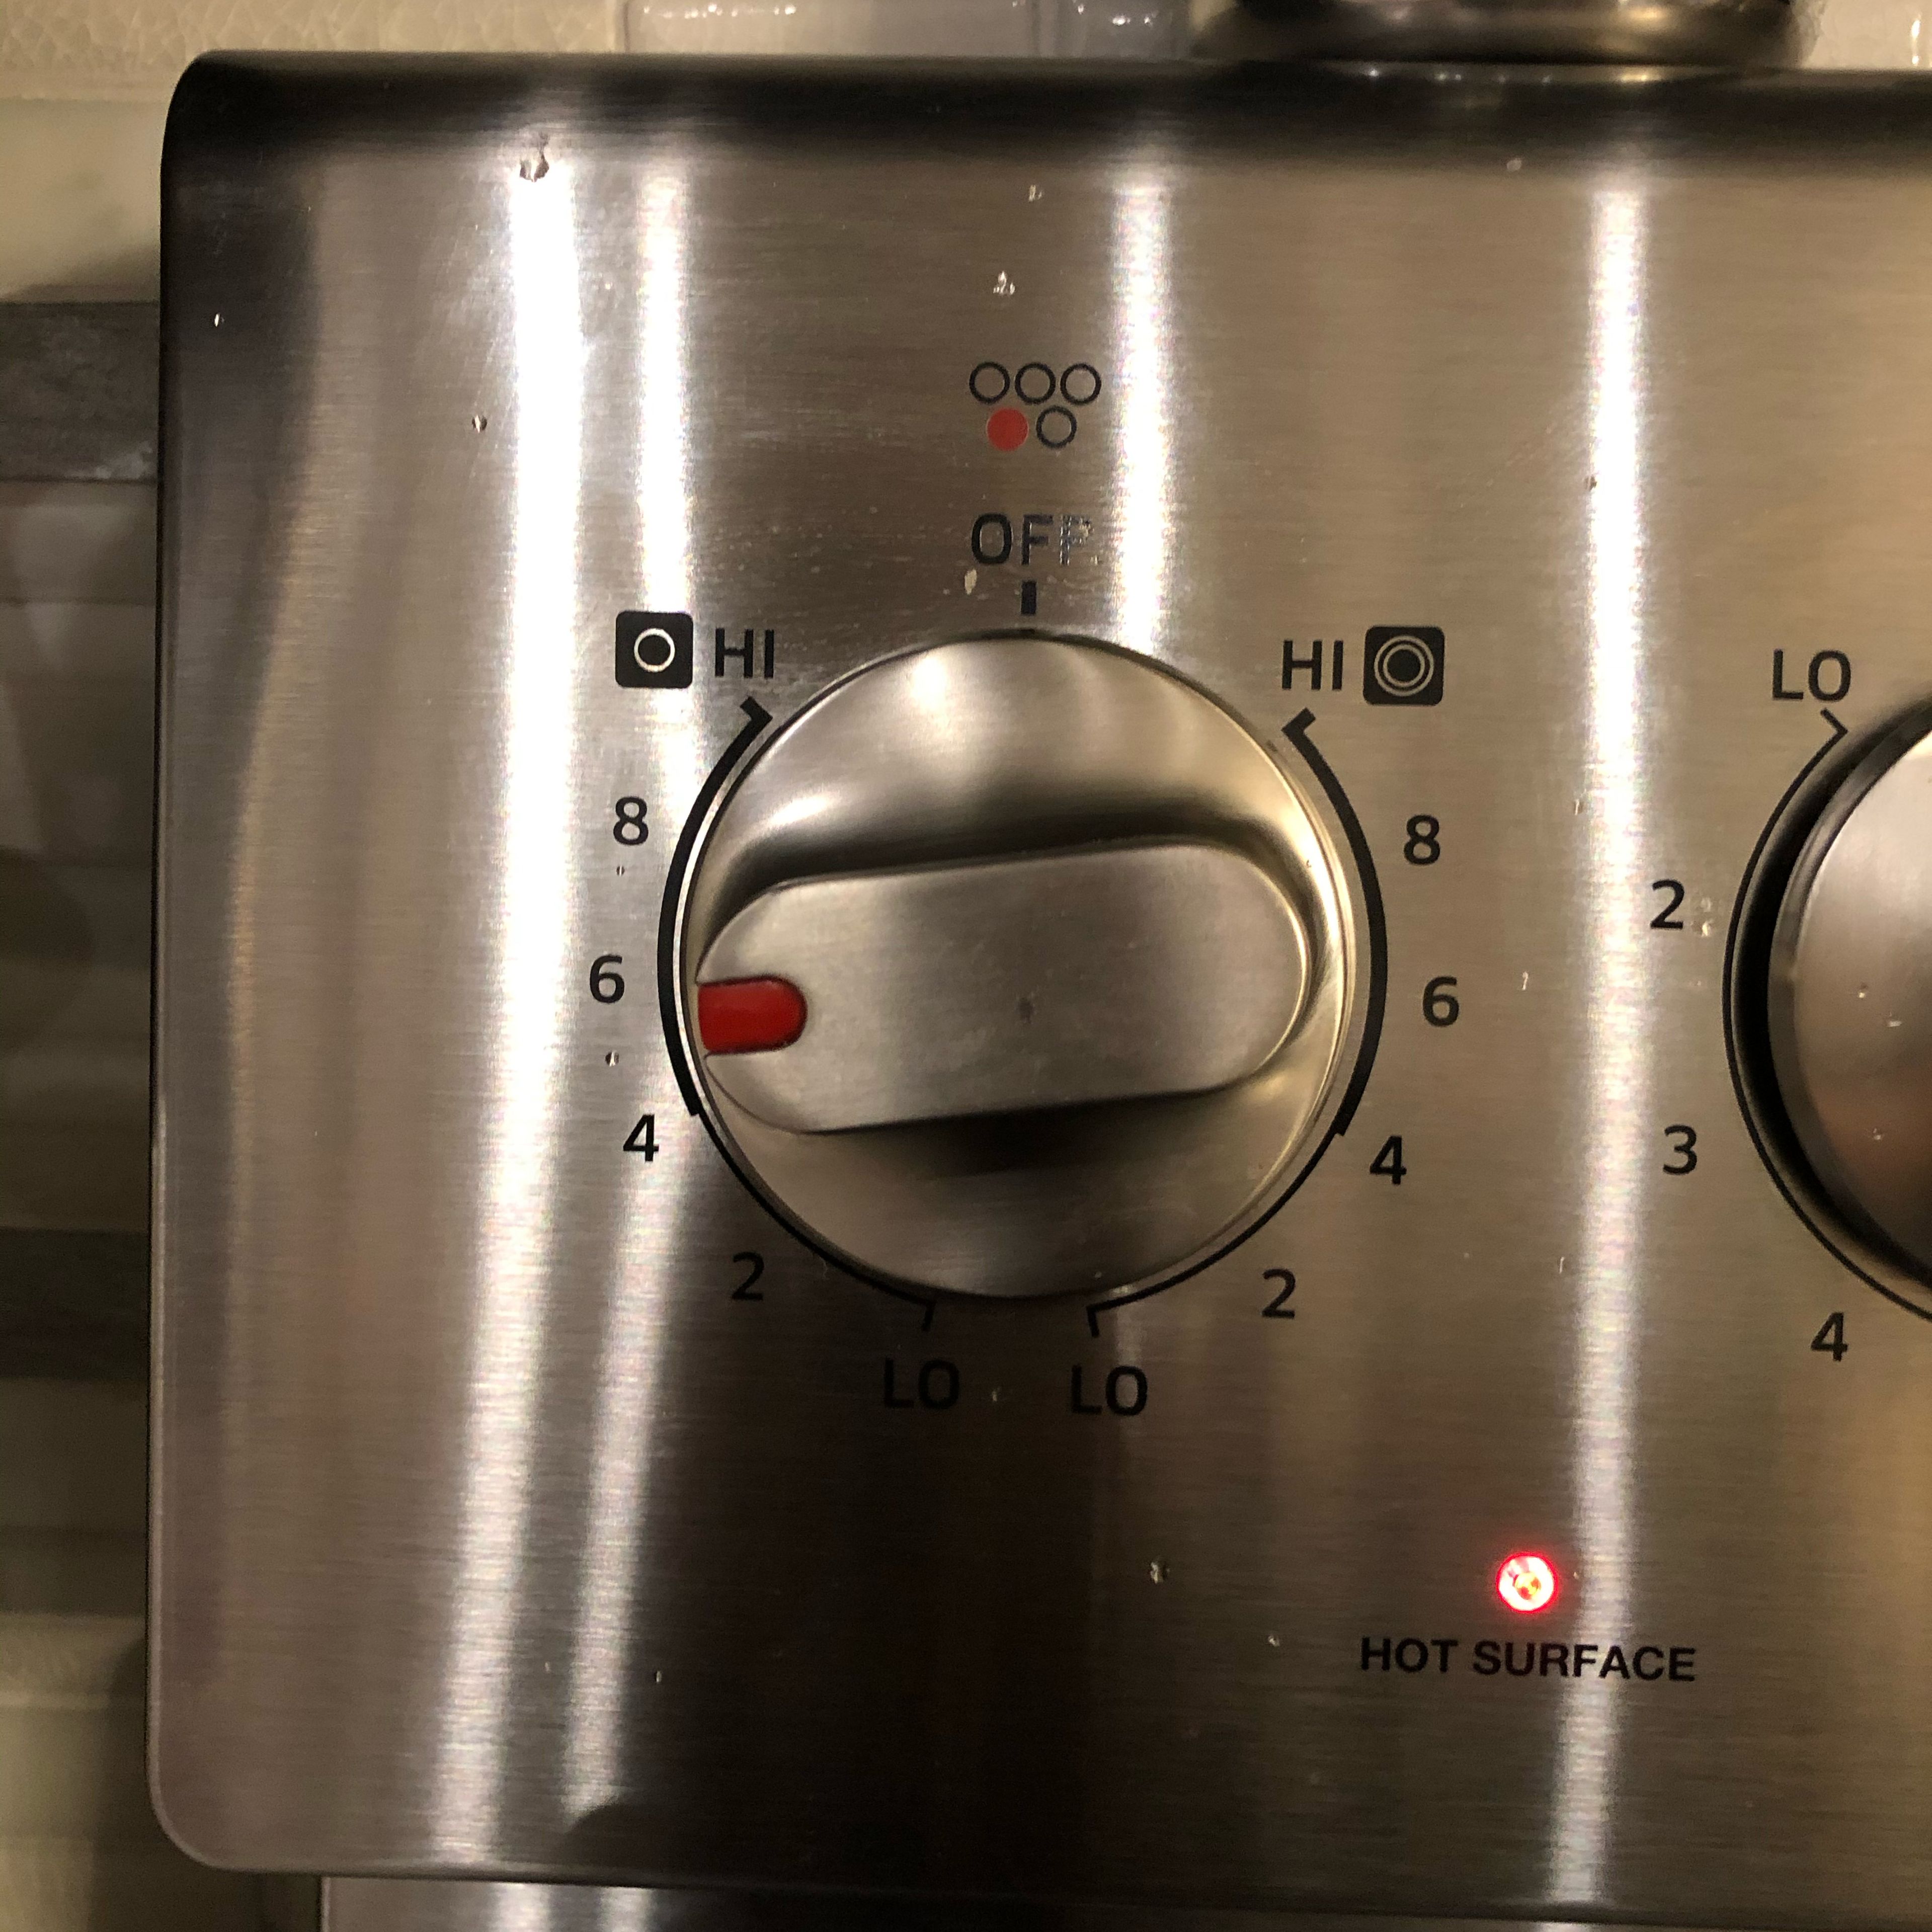 Turn the stove on 5 heat (add more heat if it is necessary)￼